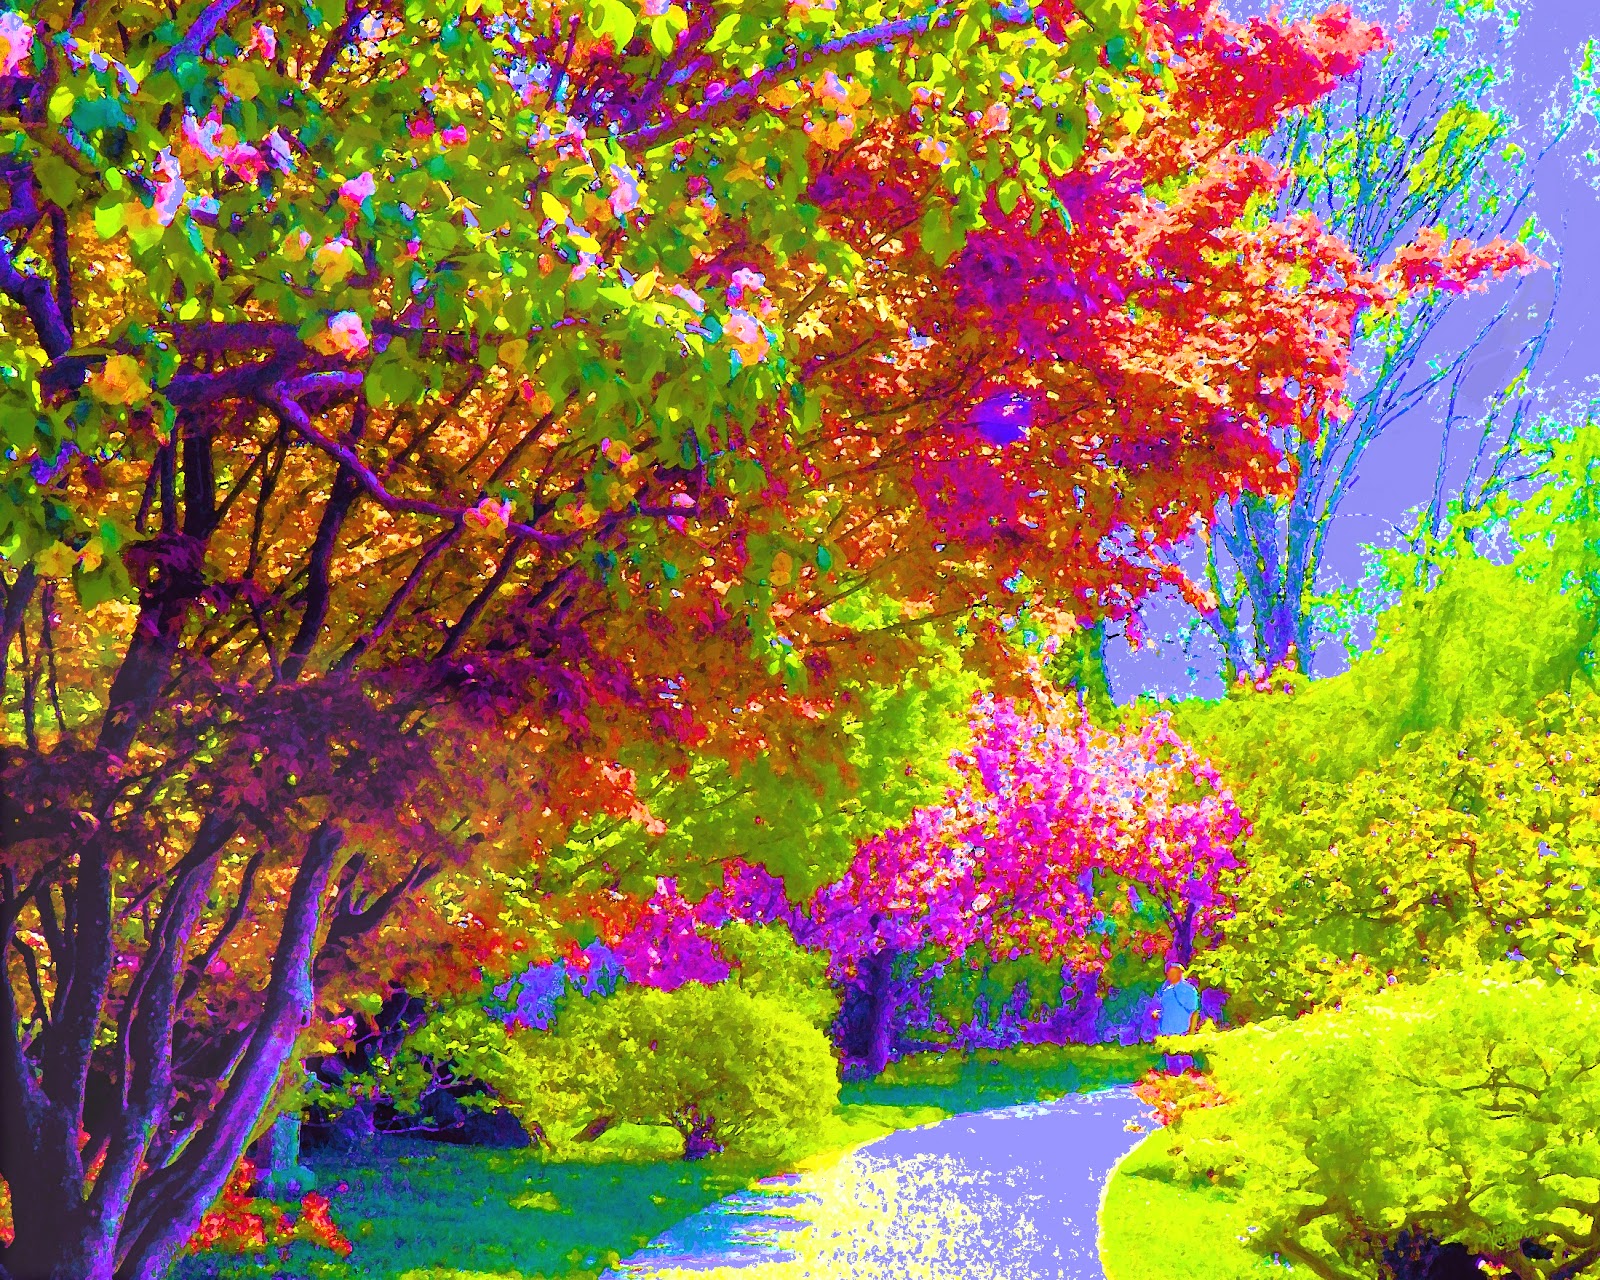 Painting-Of-Colorful-Trees-.jpg